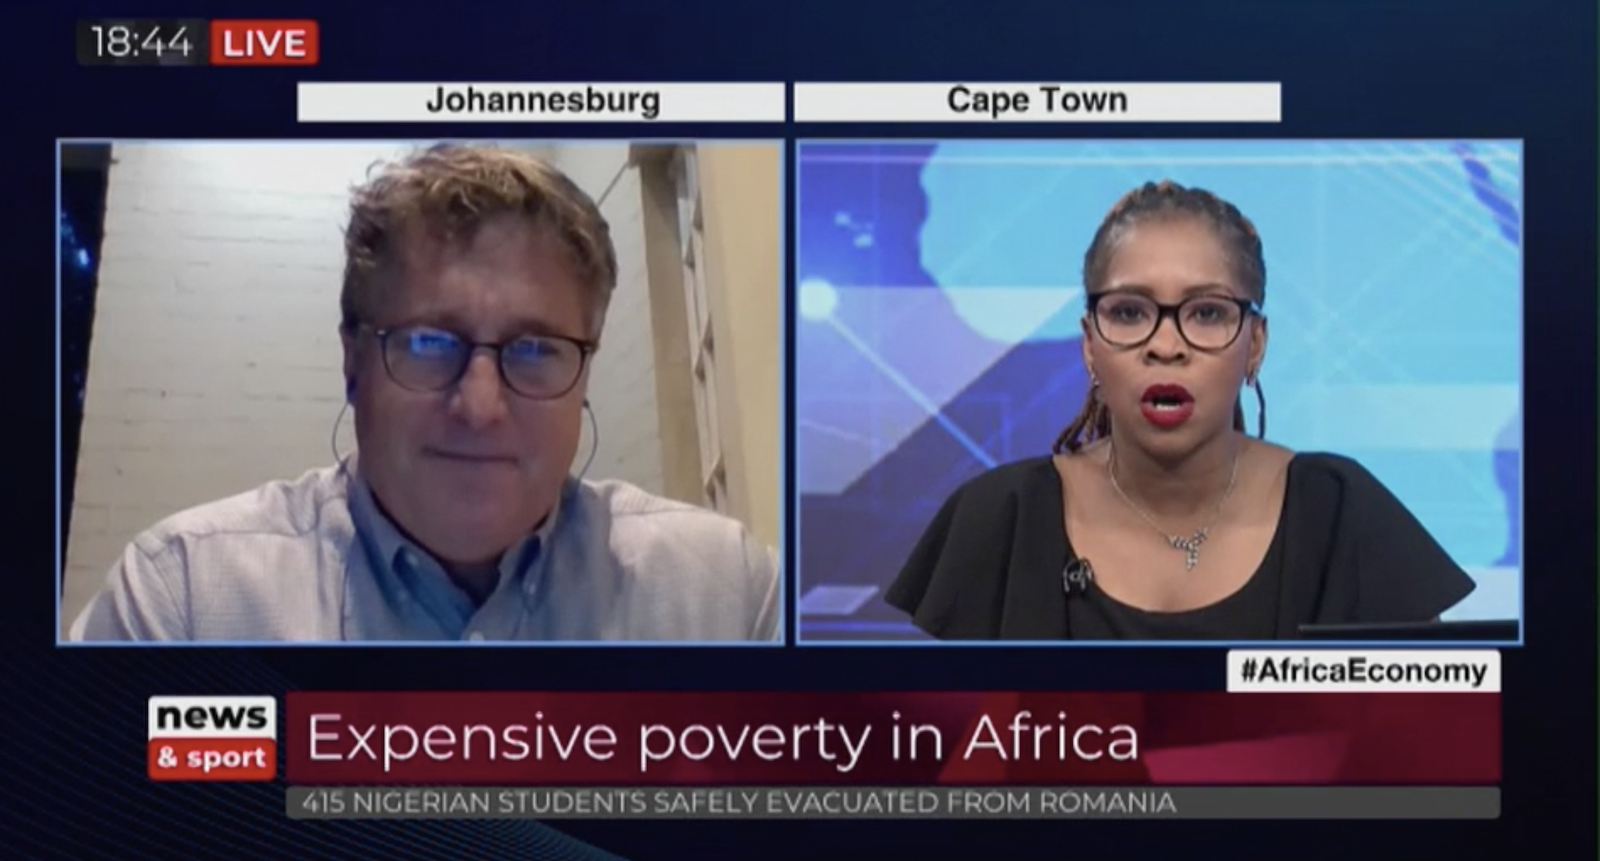 Dr Greg Mills on eNCA Discussing the Launch of the Expensive Poverty Documentary 